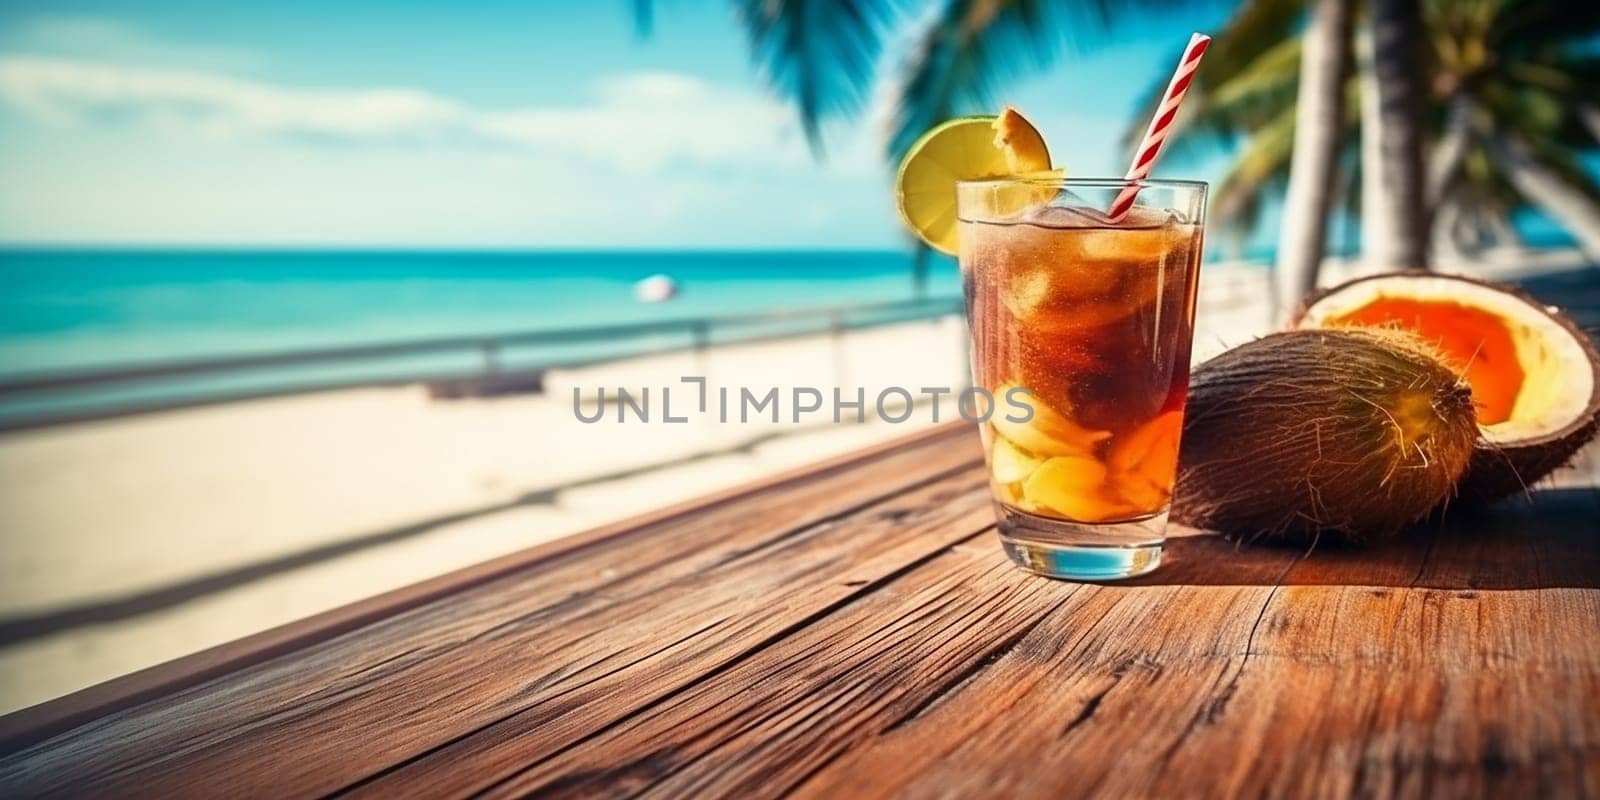 Iced beverage next to a coconut on a sunny beachside table by Hype2art